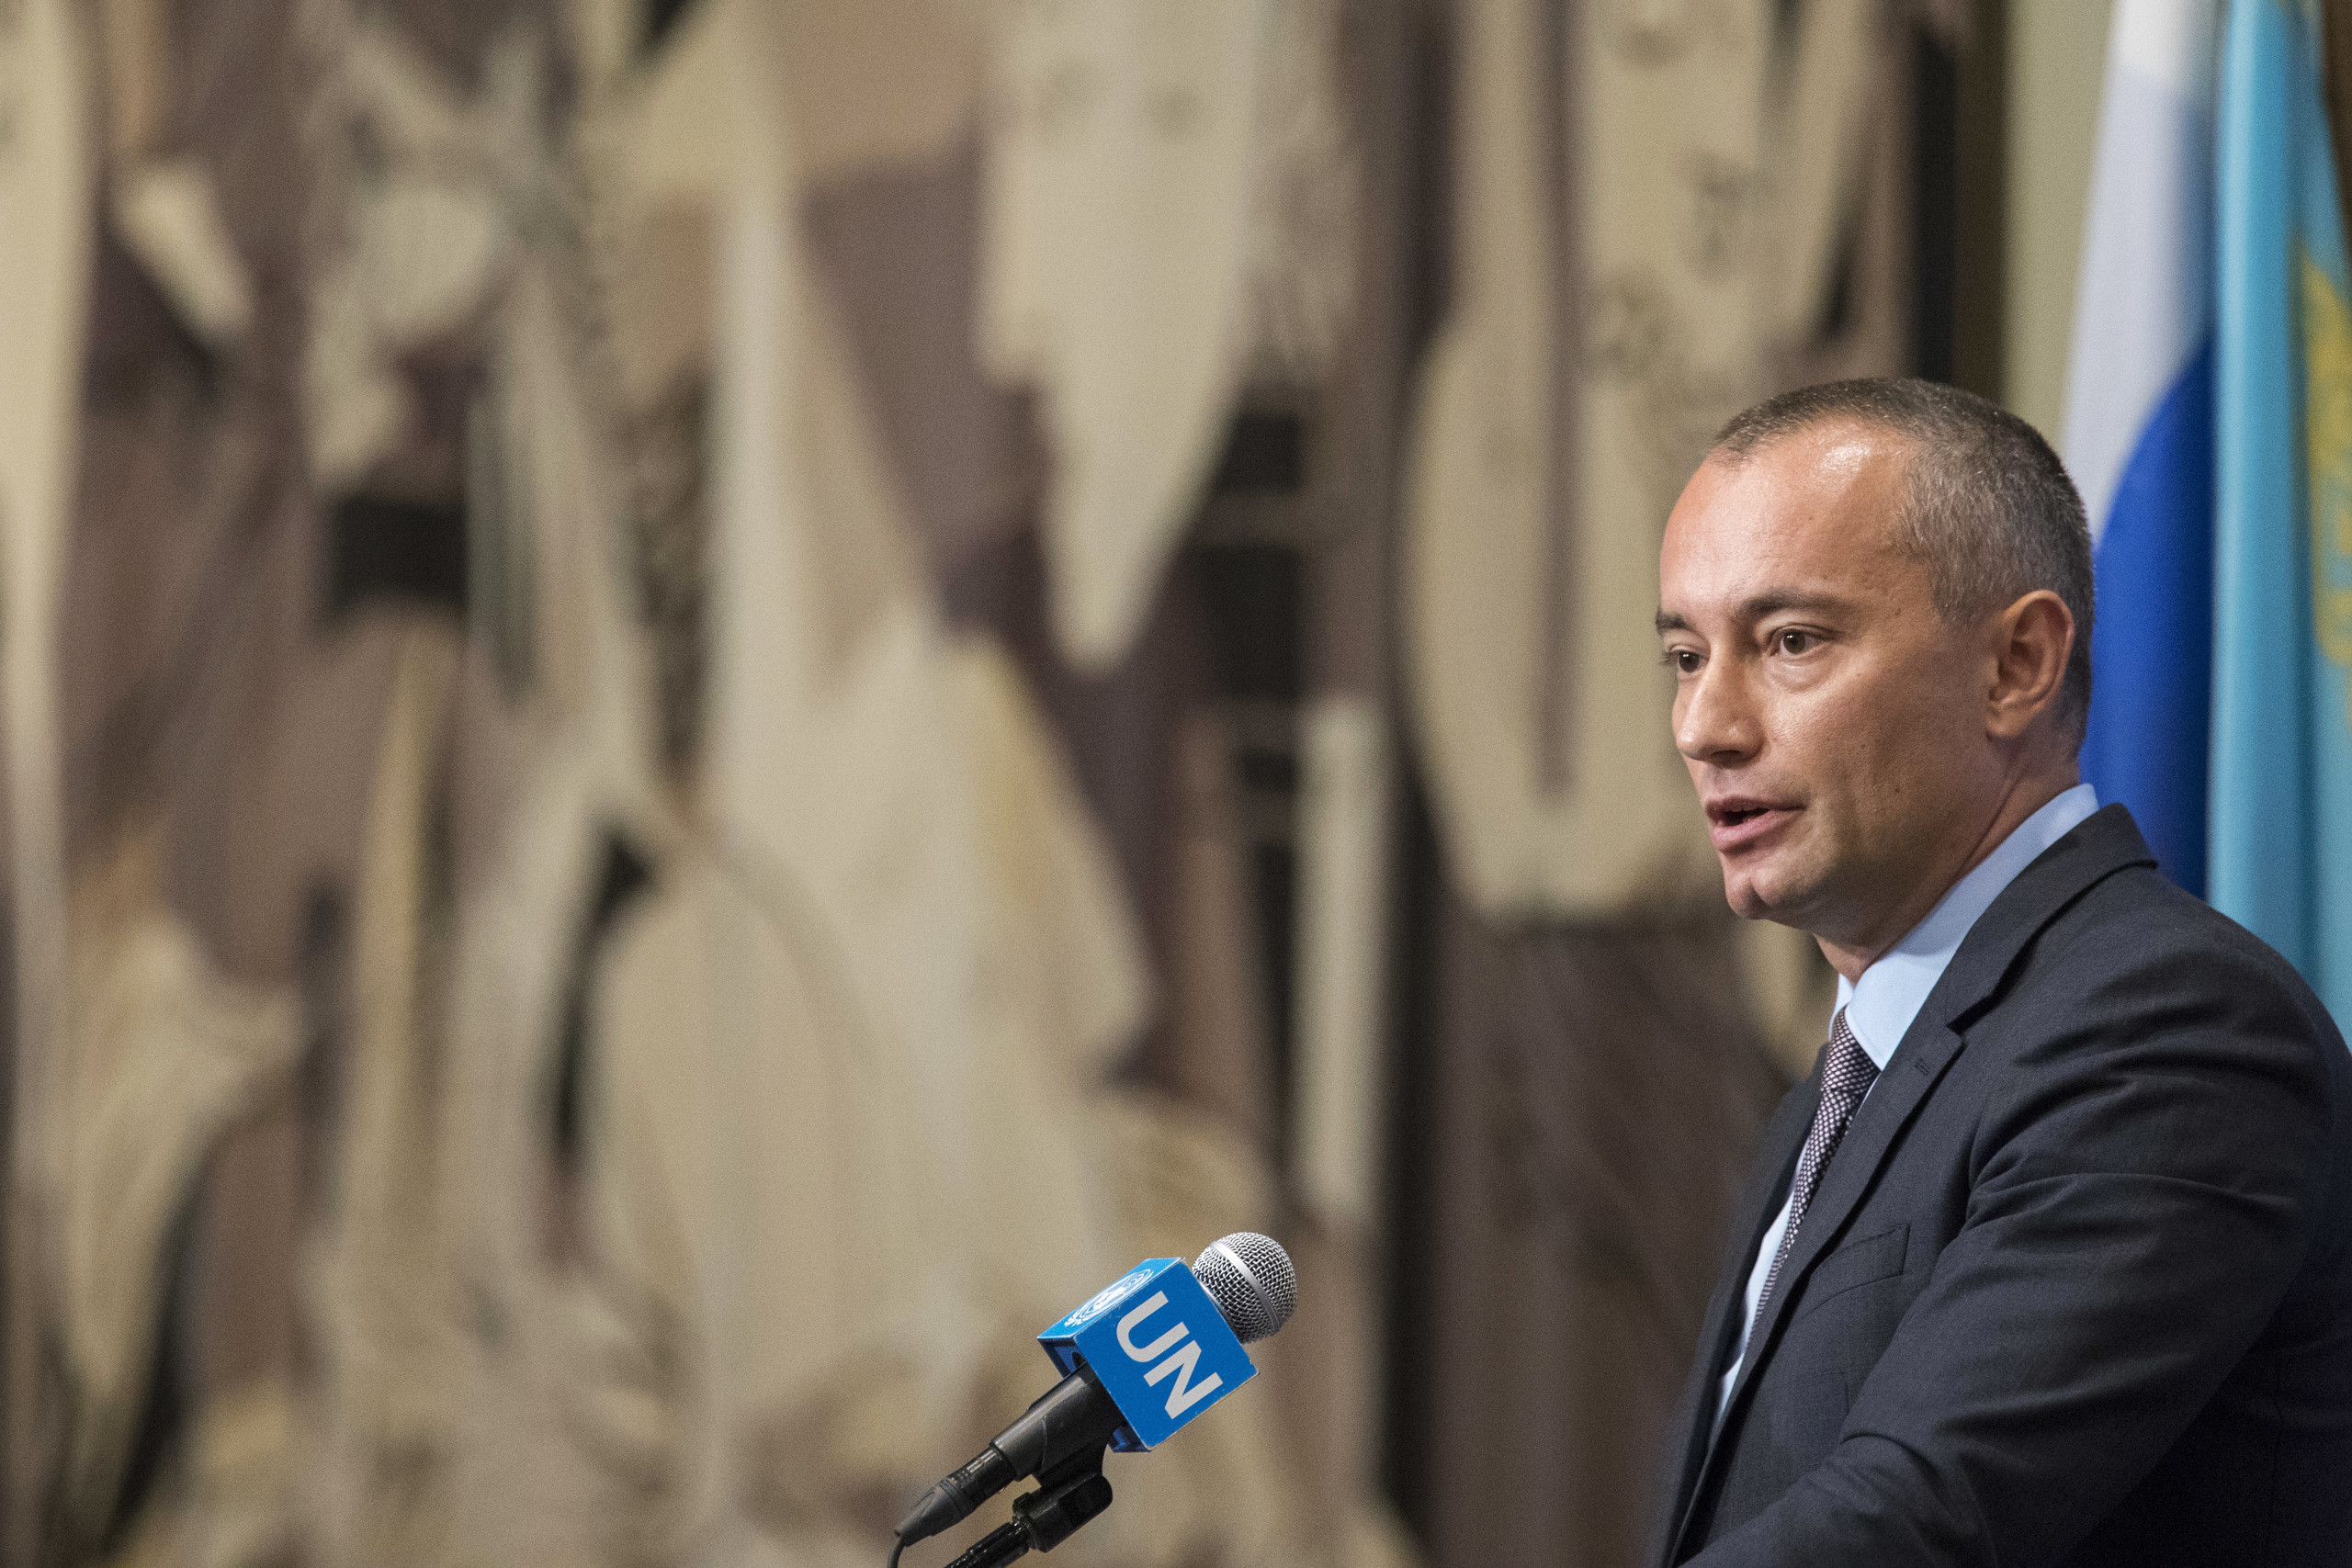 Nickolay Mladenov, United Nations Special Coordinator for the Middle East Peace Process, speaks to reporters about the situation in Israel outside Security Council chambers, Monday, July 24, 2017 at United Nations headquarters. (AP Photo/Mary Altaffer)